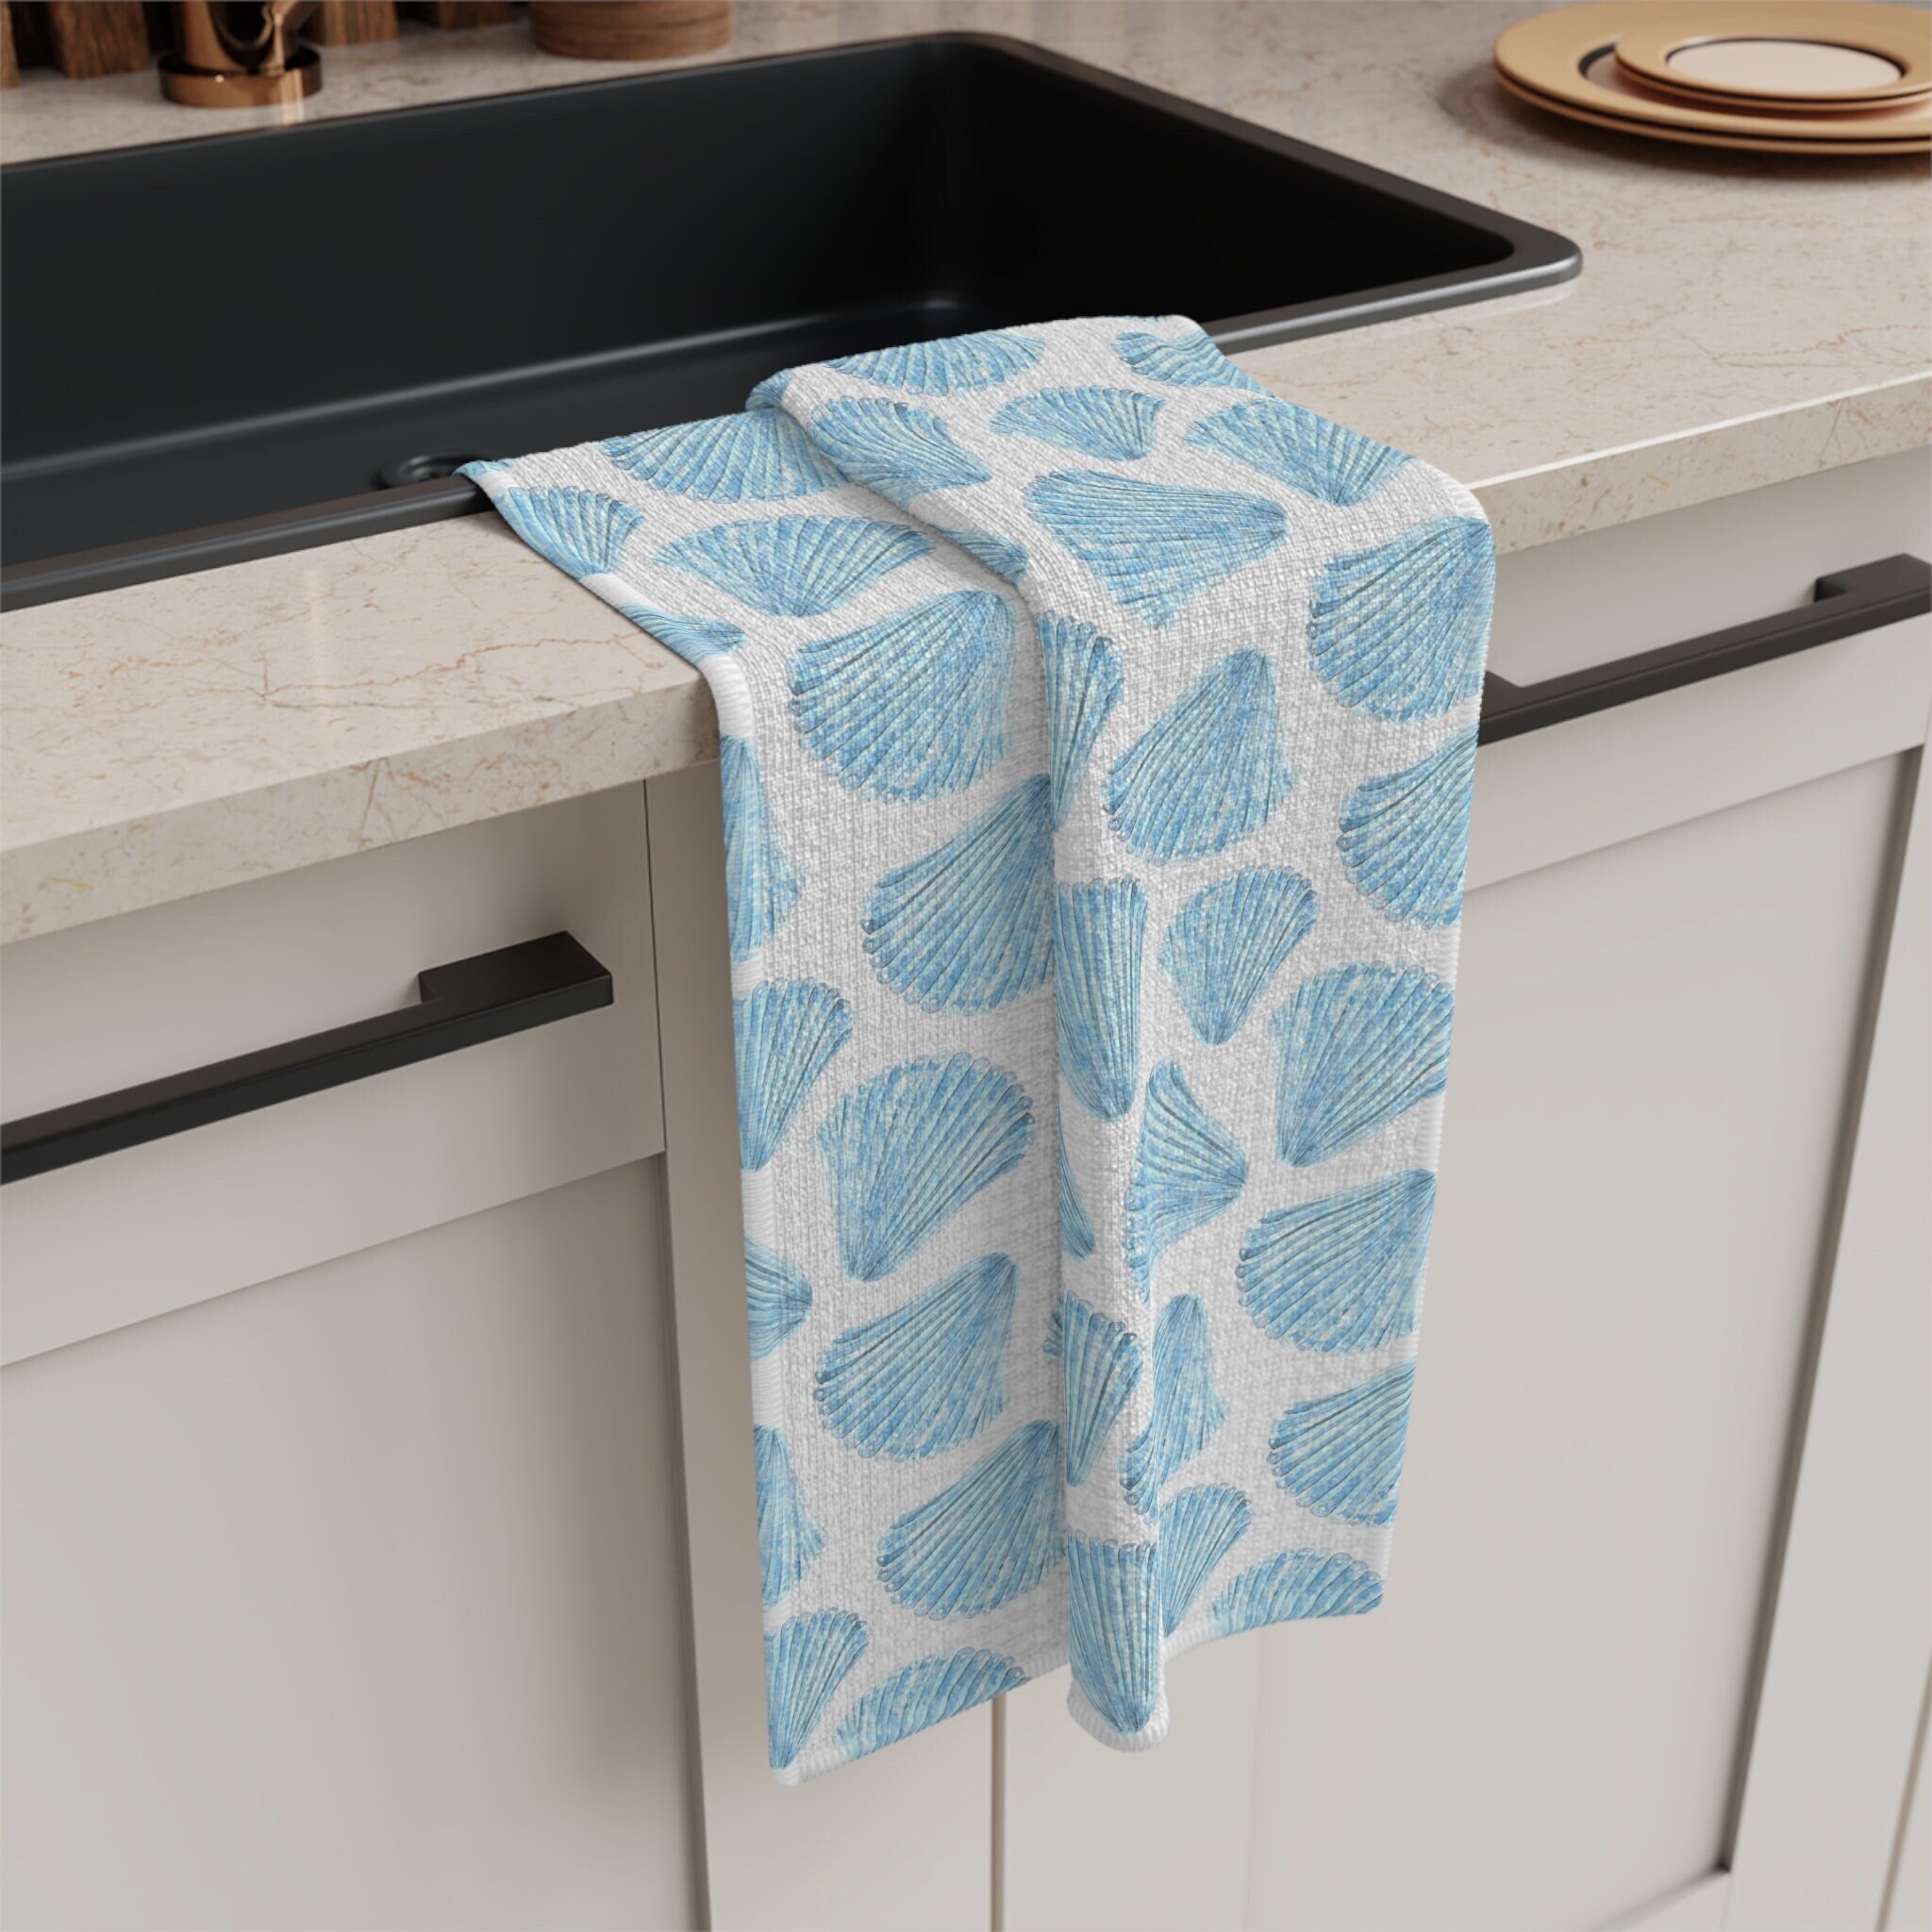 Anchors Away Nautical Kitchen Tea Towel Made in the USA